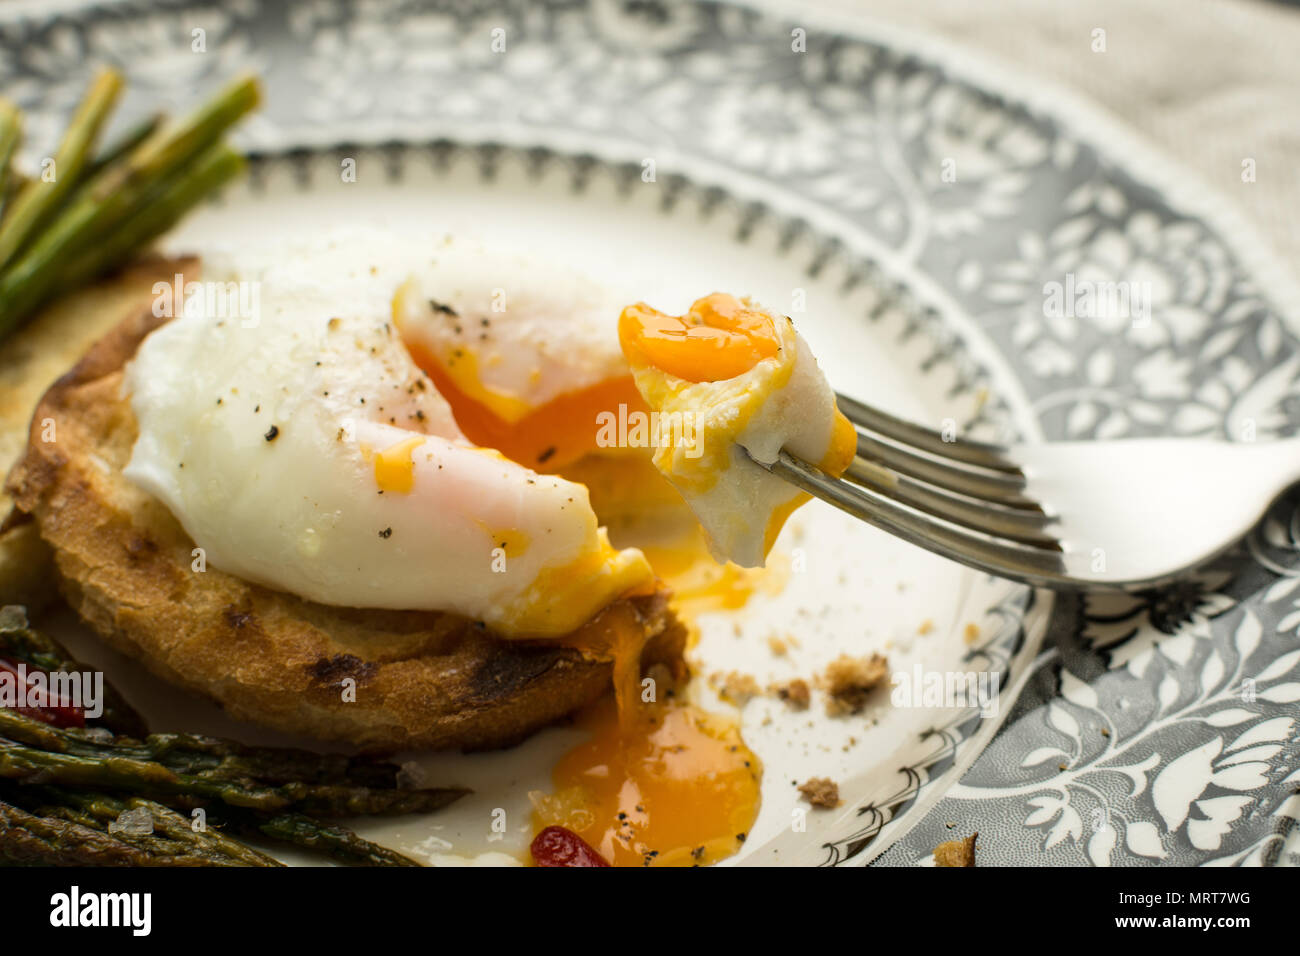 Poached Egg on Toasted Bread With Green Asparagus and Chili Peppers Stock Photo